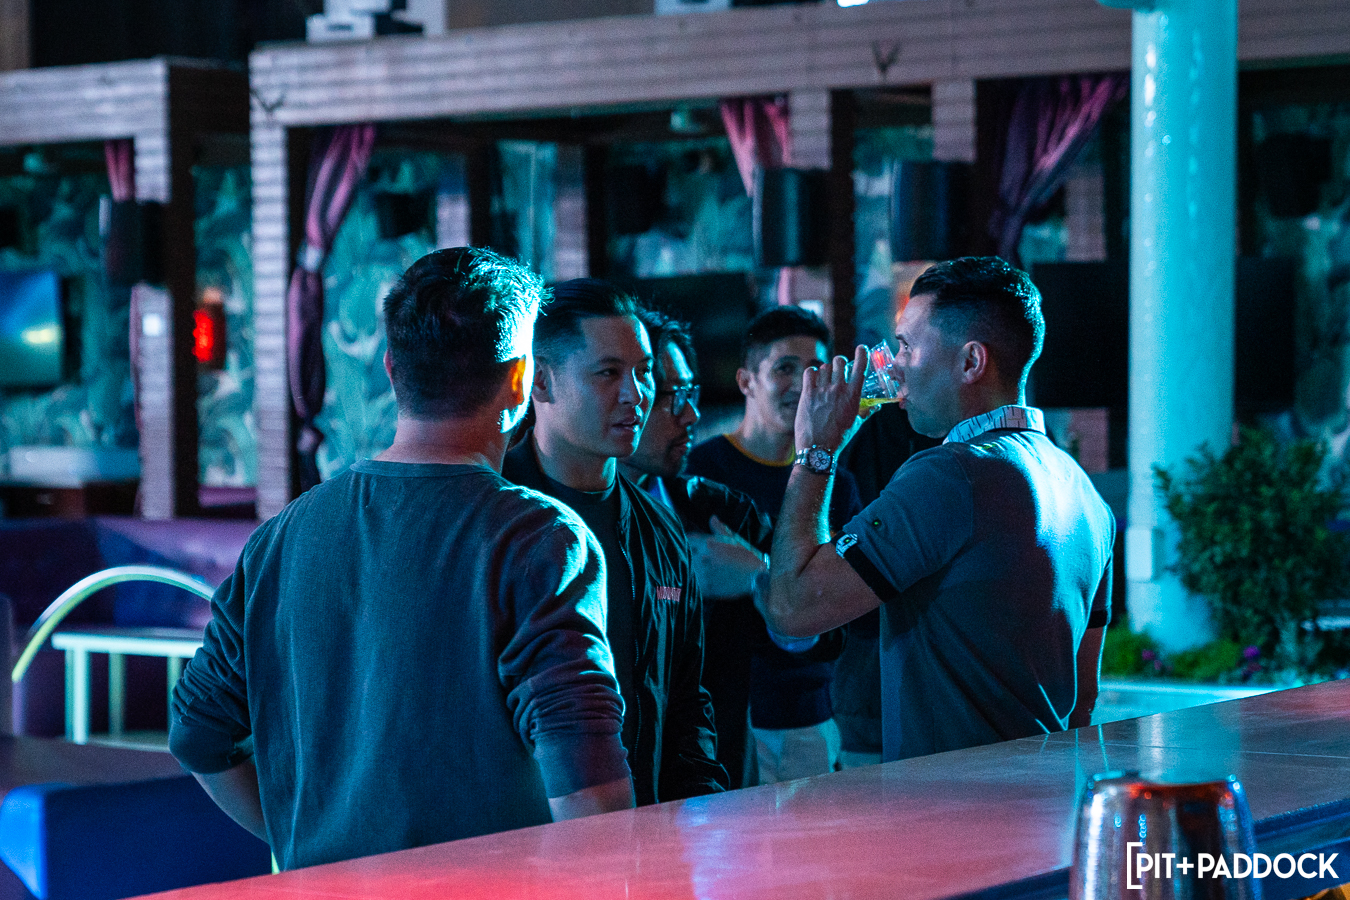 SEMA Clubhouse Turns A Vegas Nightclub Into An Industry Rooftop Reunion